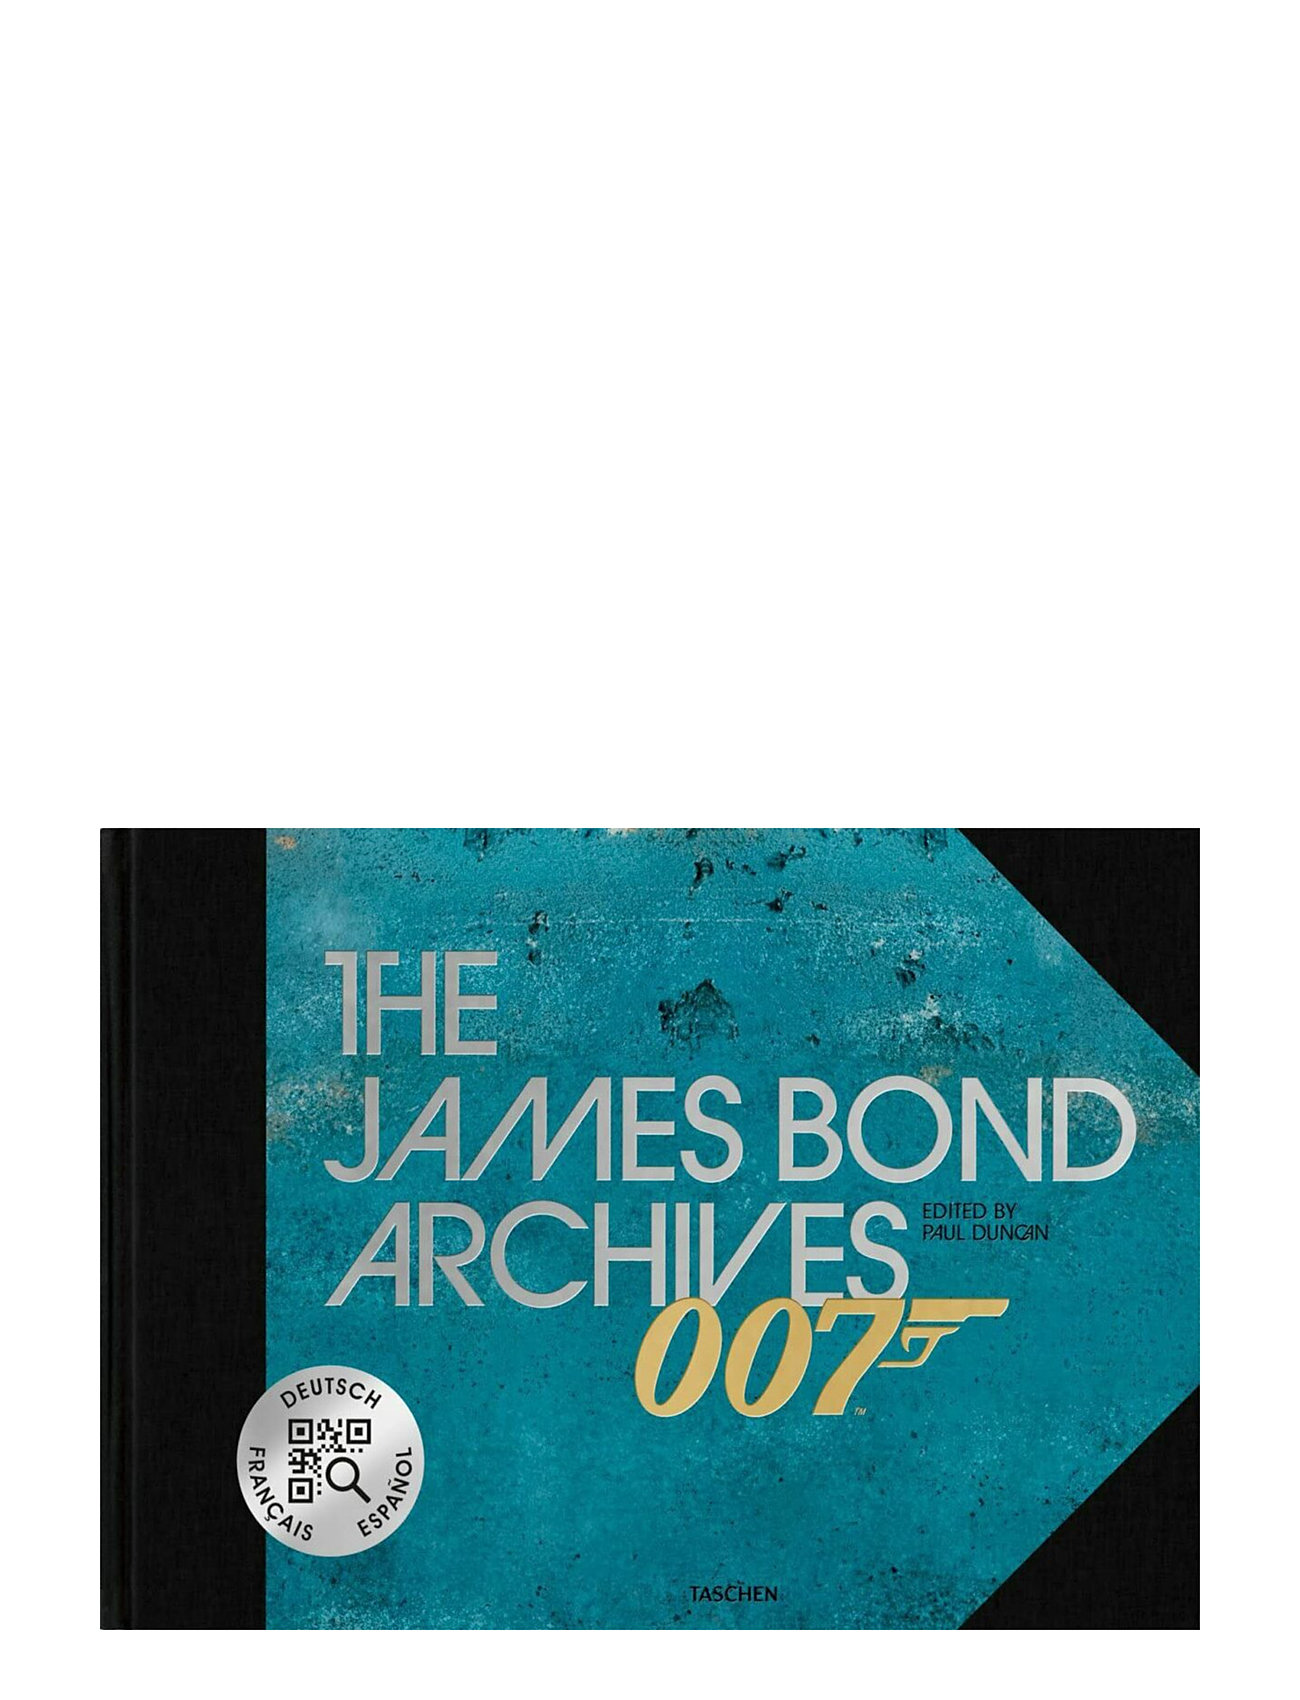 The James Bond Archives. “No Time To Die” Edition Home Decoration Books Blue New Mags